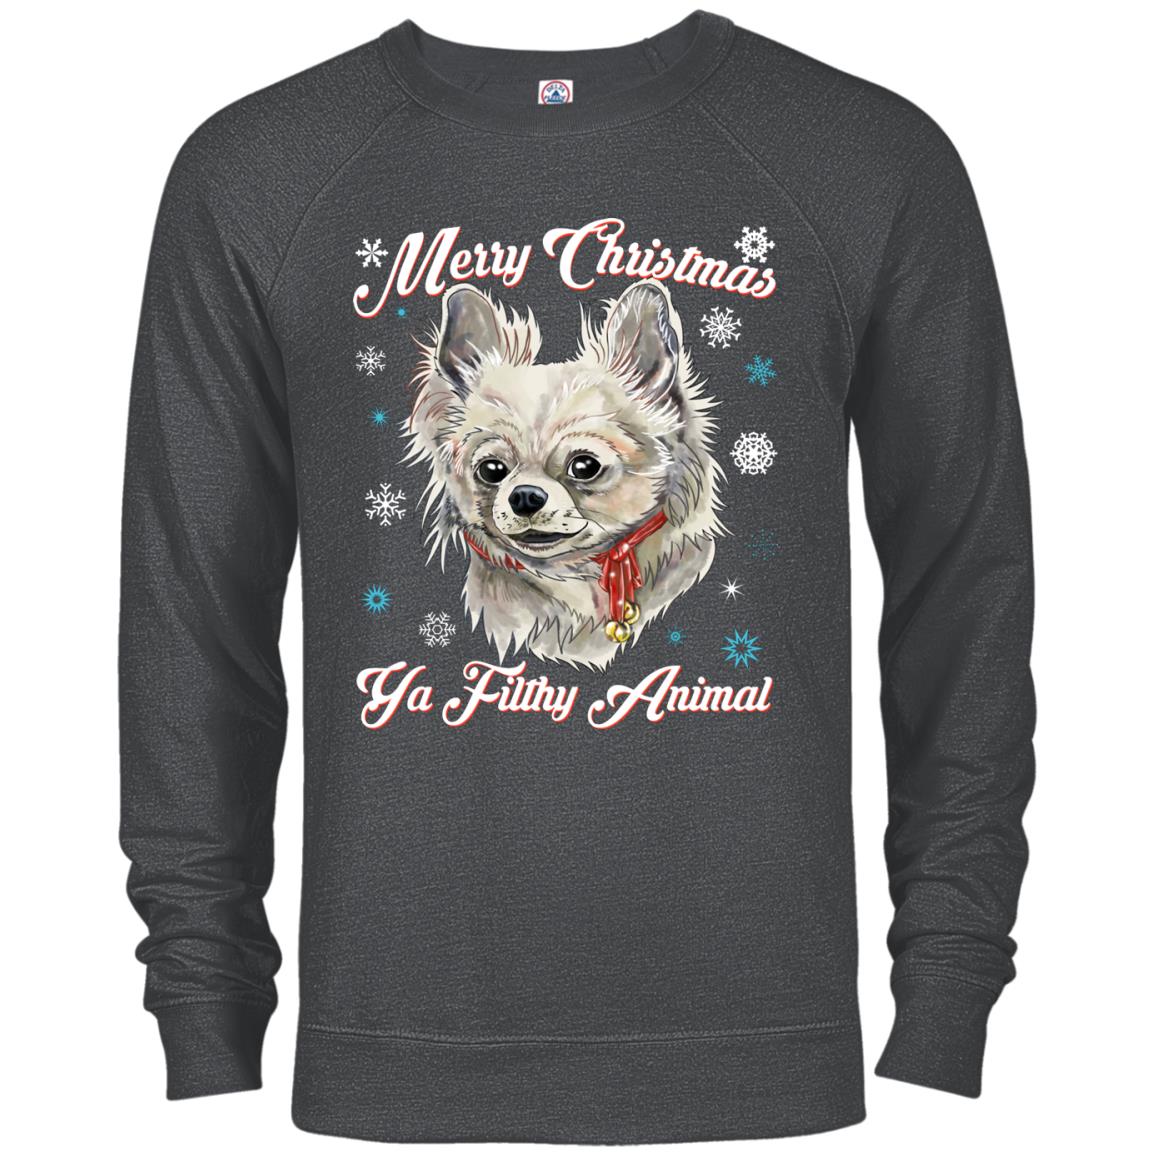 Christmas ugly Sweater Hoodie - Chihuahua Dog Christmas Gift Idea - GoneBold.gift